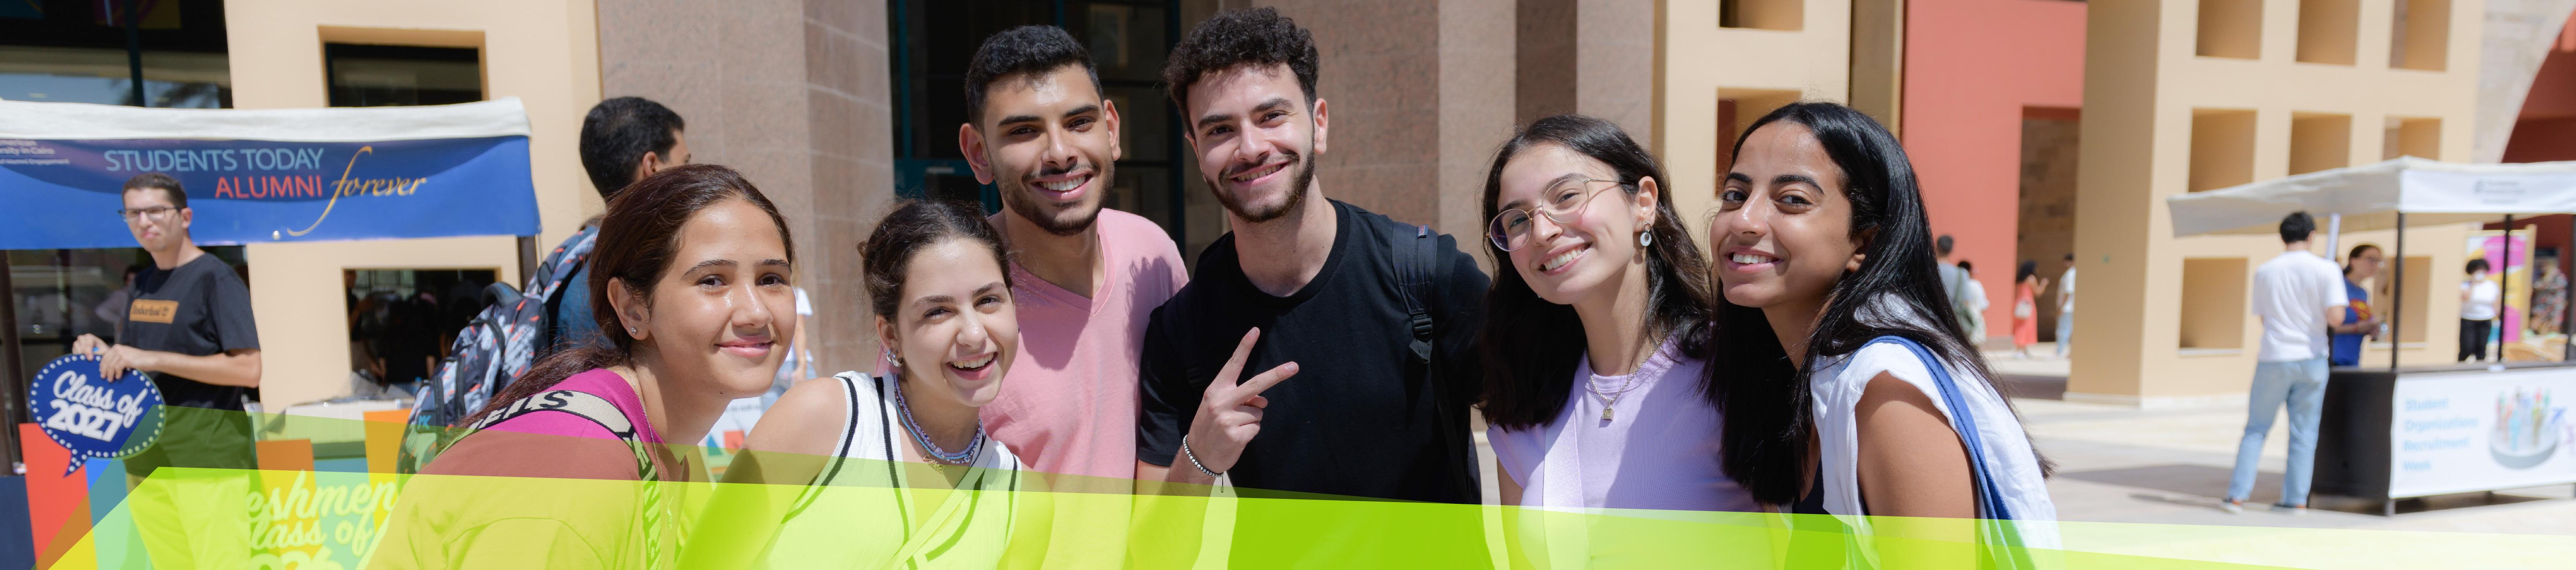 A group of boys and girls on auc campus plaza smiling